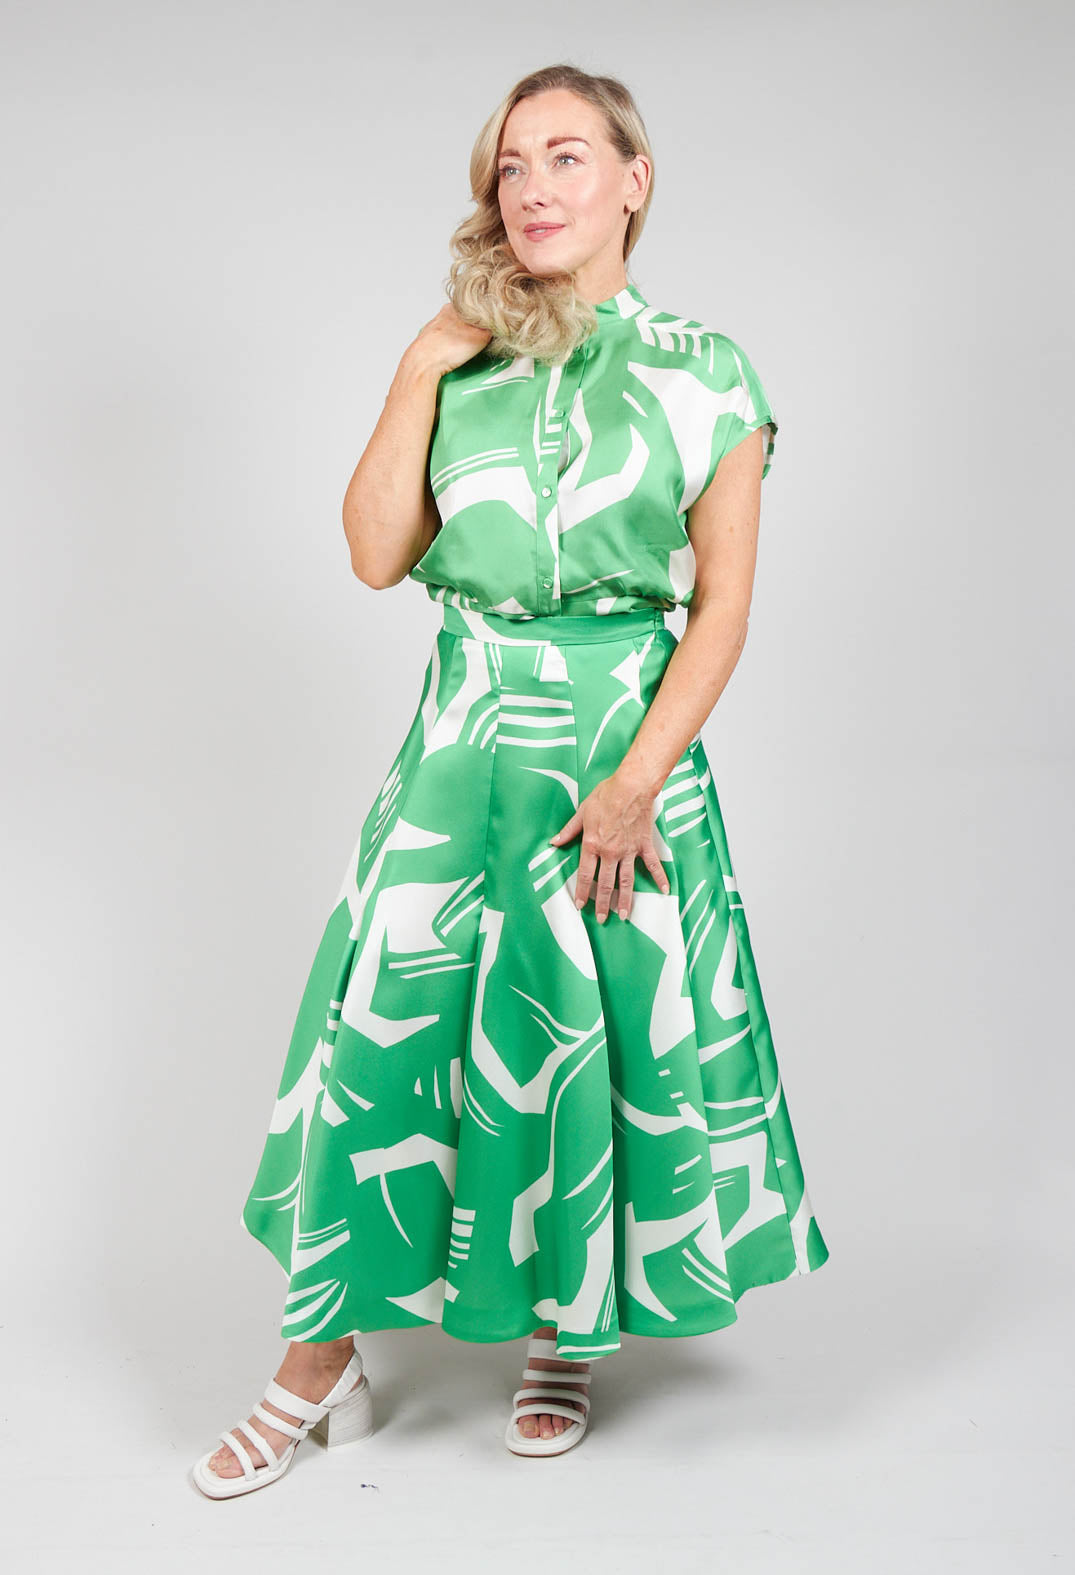 lady wearing a green a-line pleated skirt